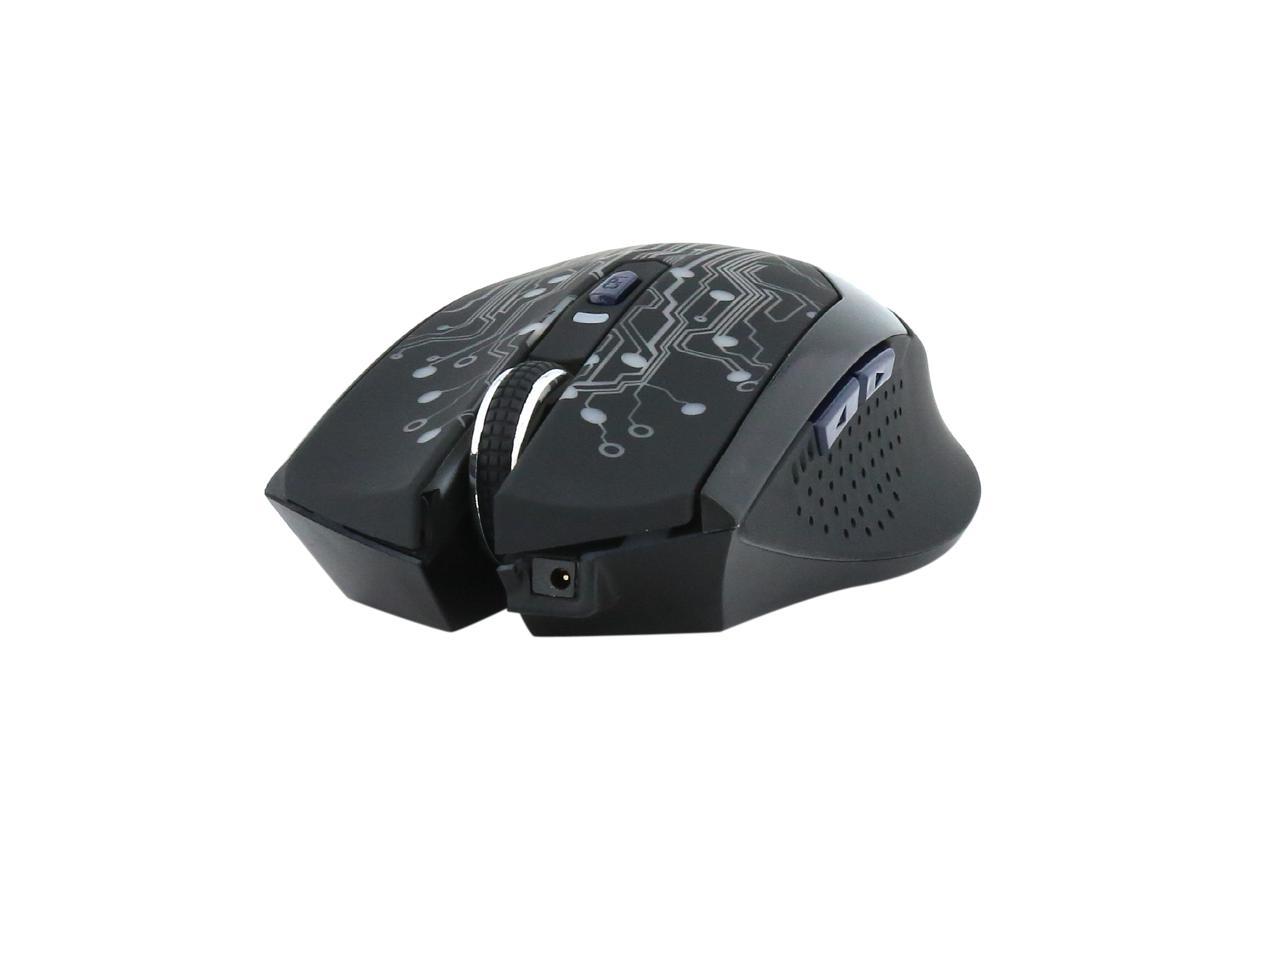 how to change battery in microsoft wireless mouse 3500